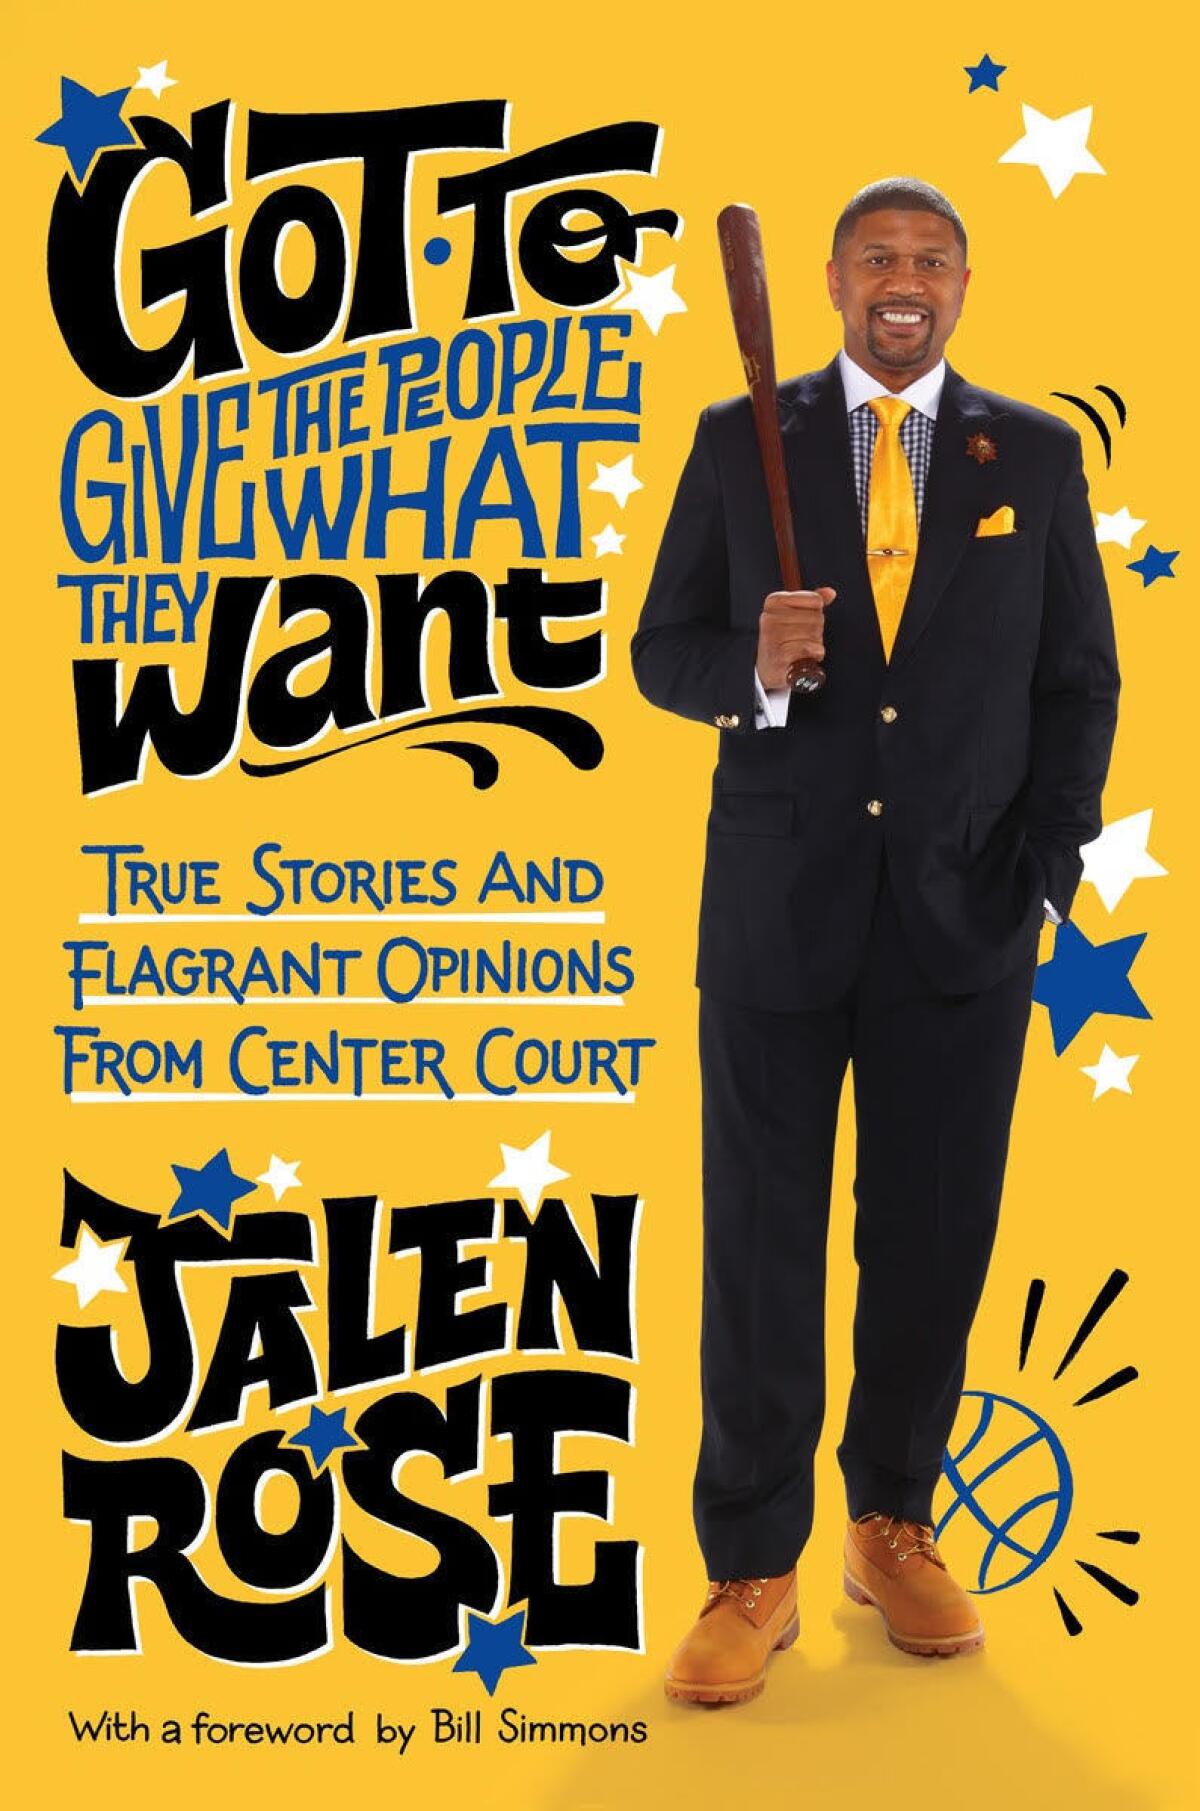 "Got to Give the People What They Want" by Jalen Rose